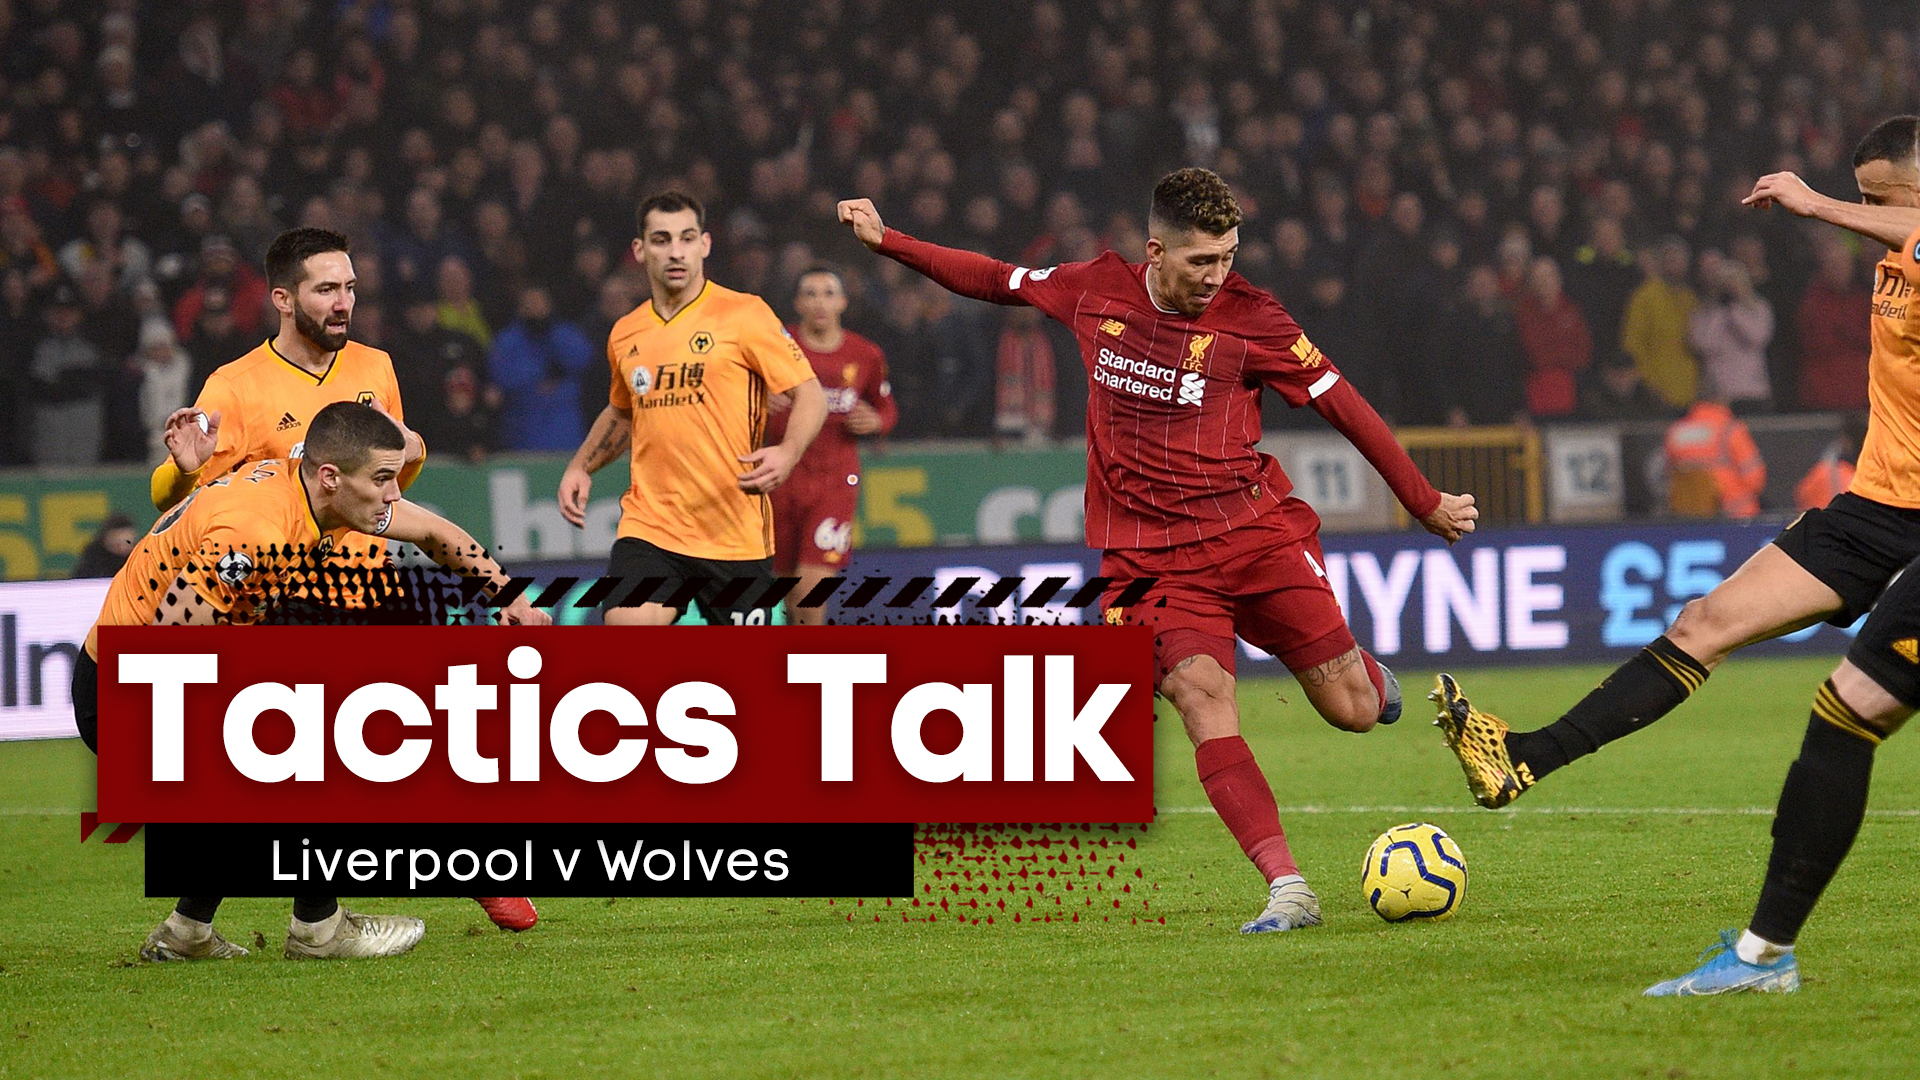 Liverpool v Wolves free betting tips Best bets and tactical preview Premier League